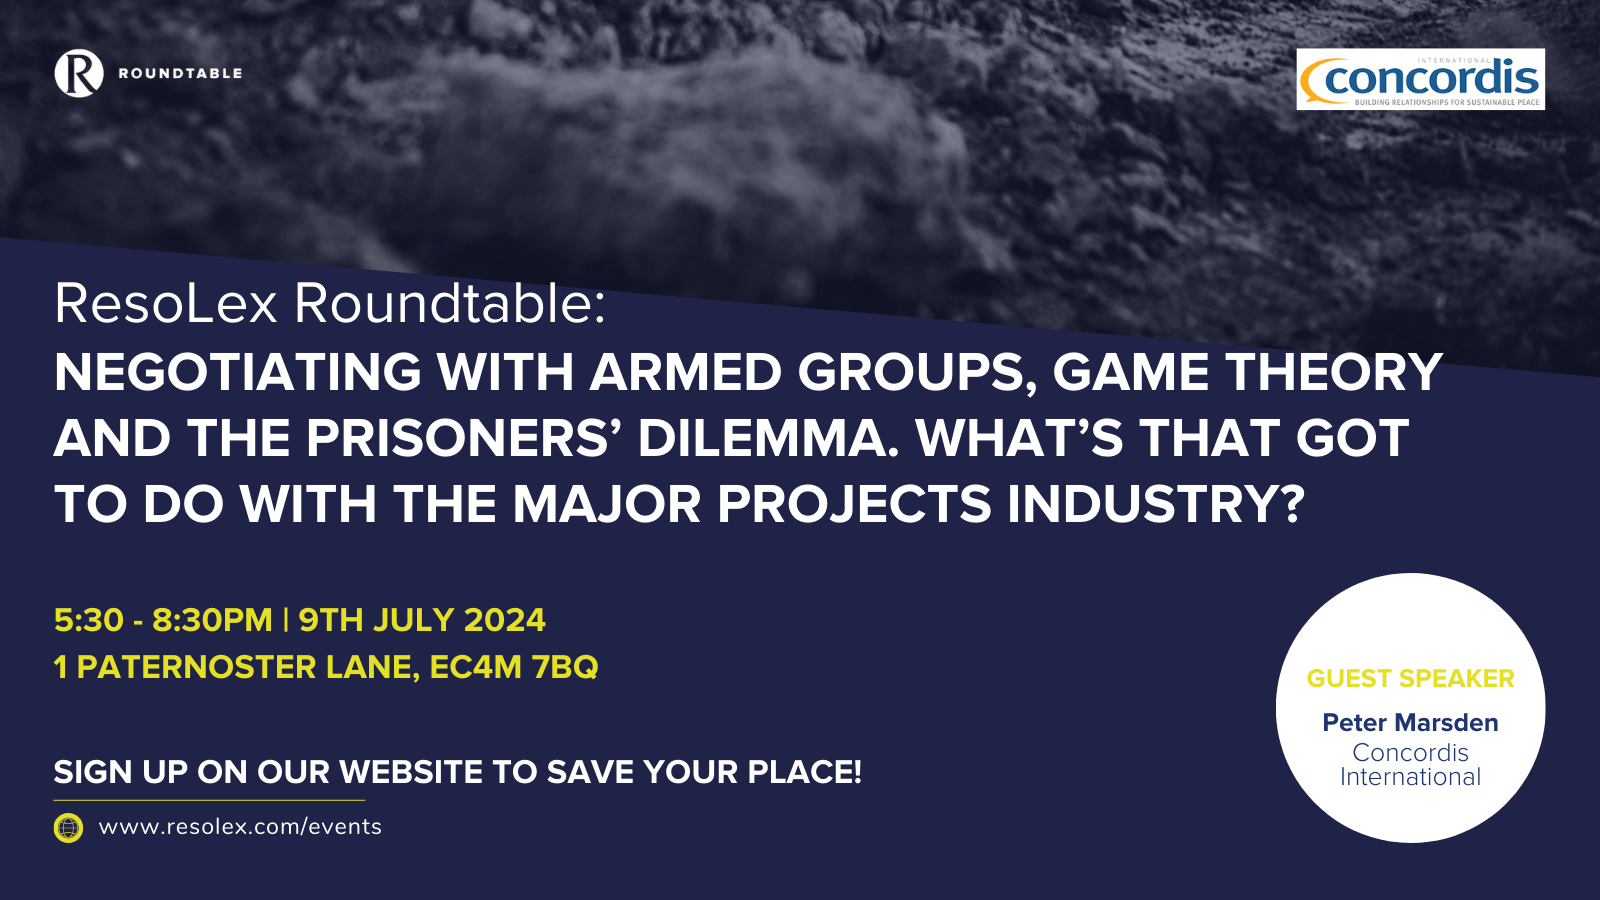 ResoLex Roundtable: Negotiating with armed groups, game theory and the prisoners’ dilemma. What’s that got to do with the major projects industry?